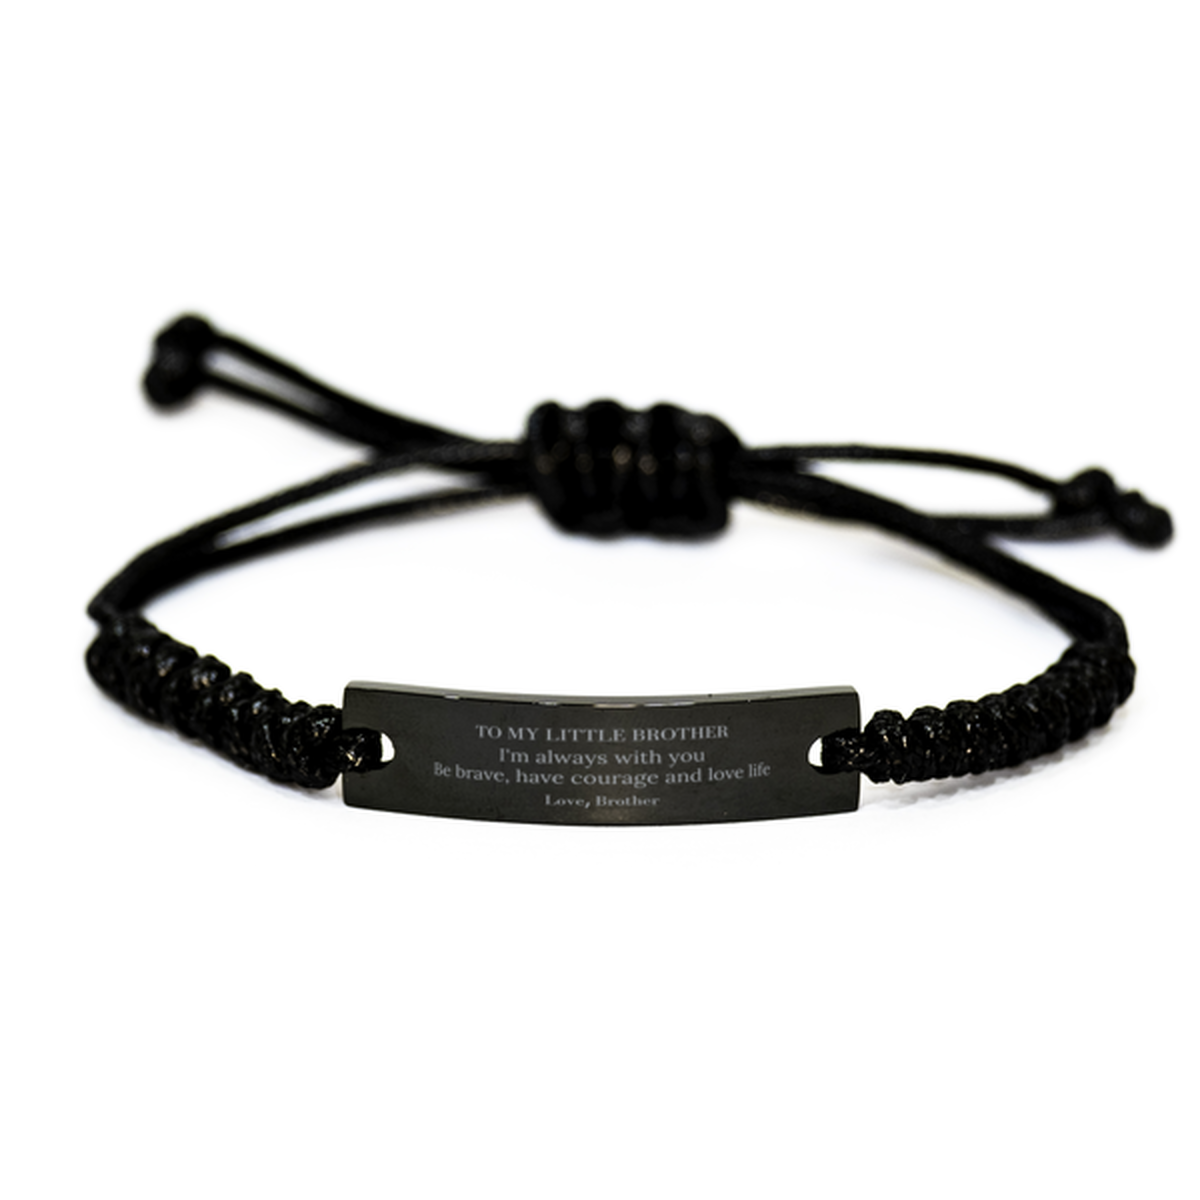 To My Little Brother Gifts from Brother, Unique Black Rope Bracelet Inspirational Christmas Birthday Graduation Gifts for Little Brother I'm always with you. Be brave, have courage and love life. Love, Brother